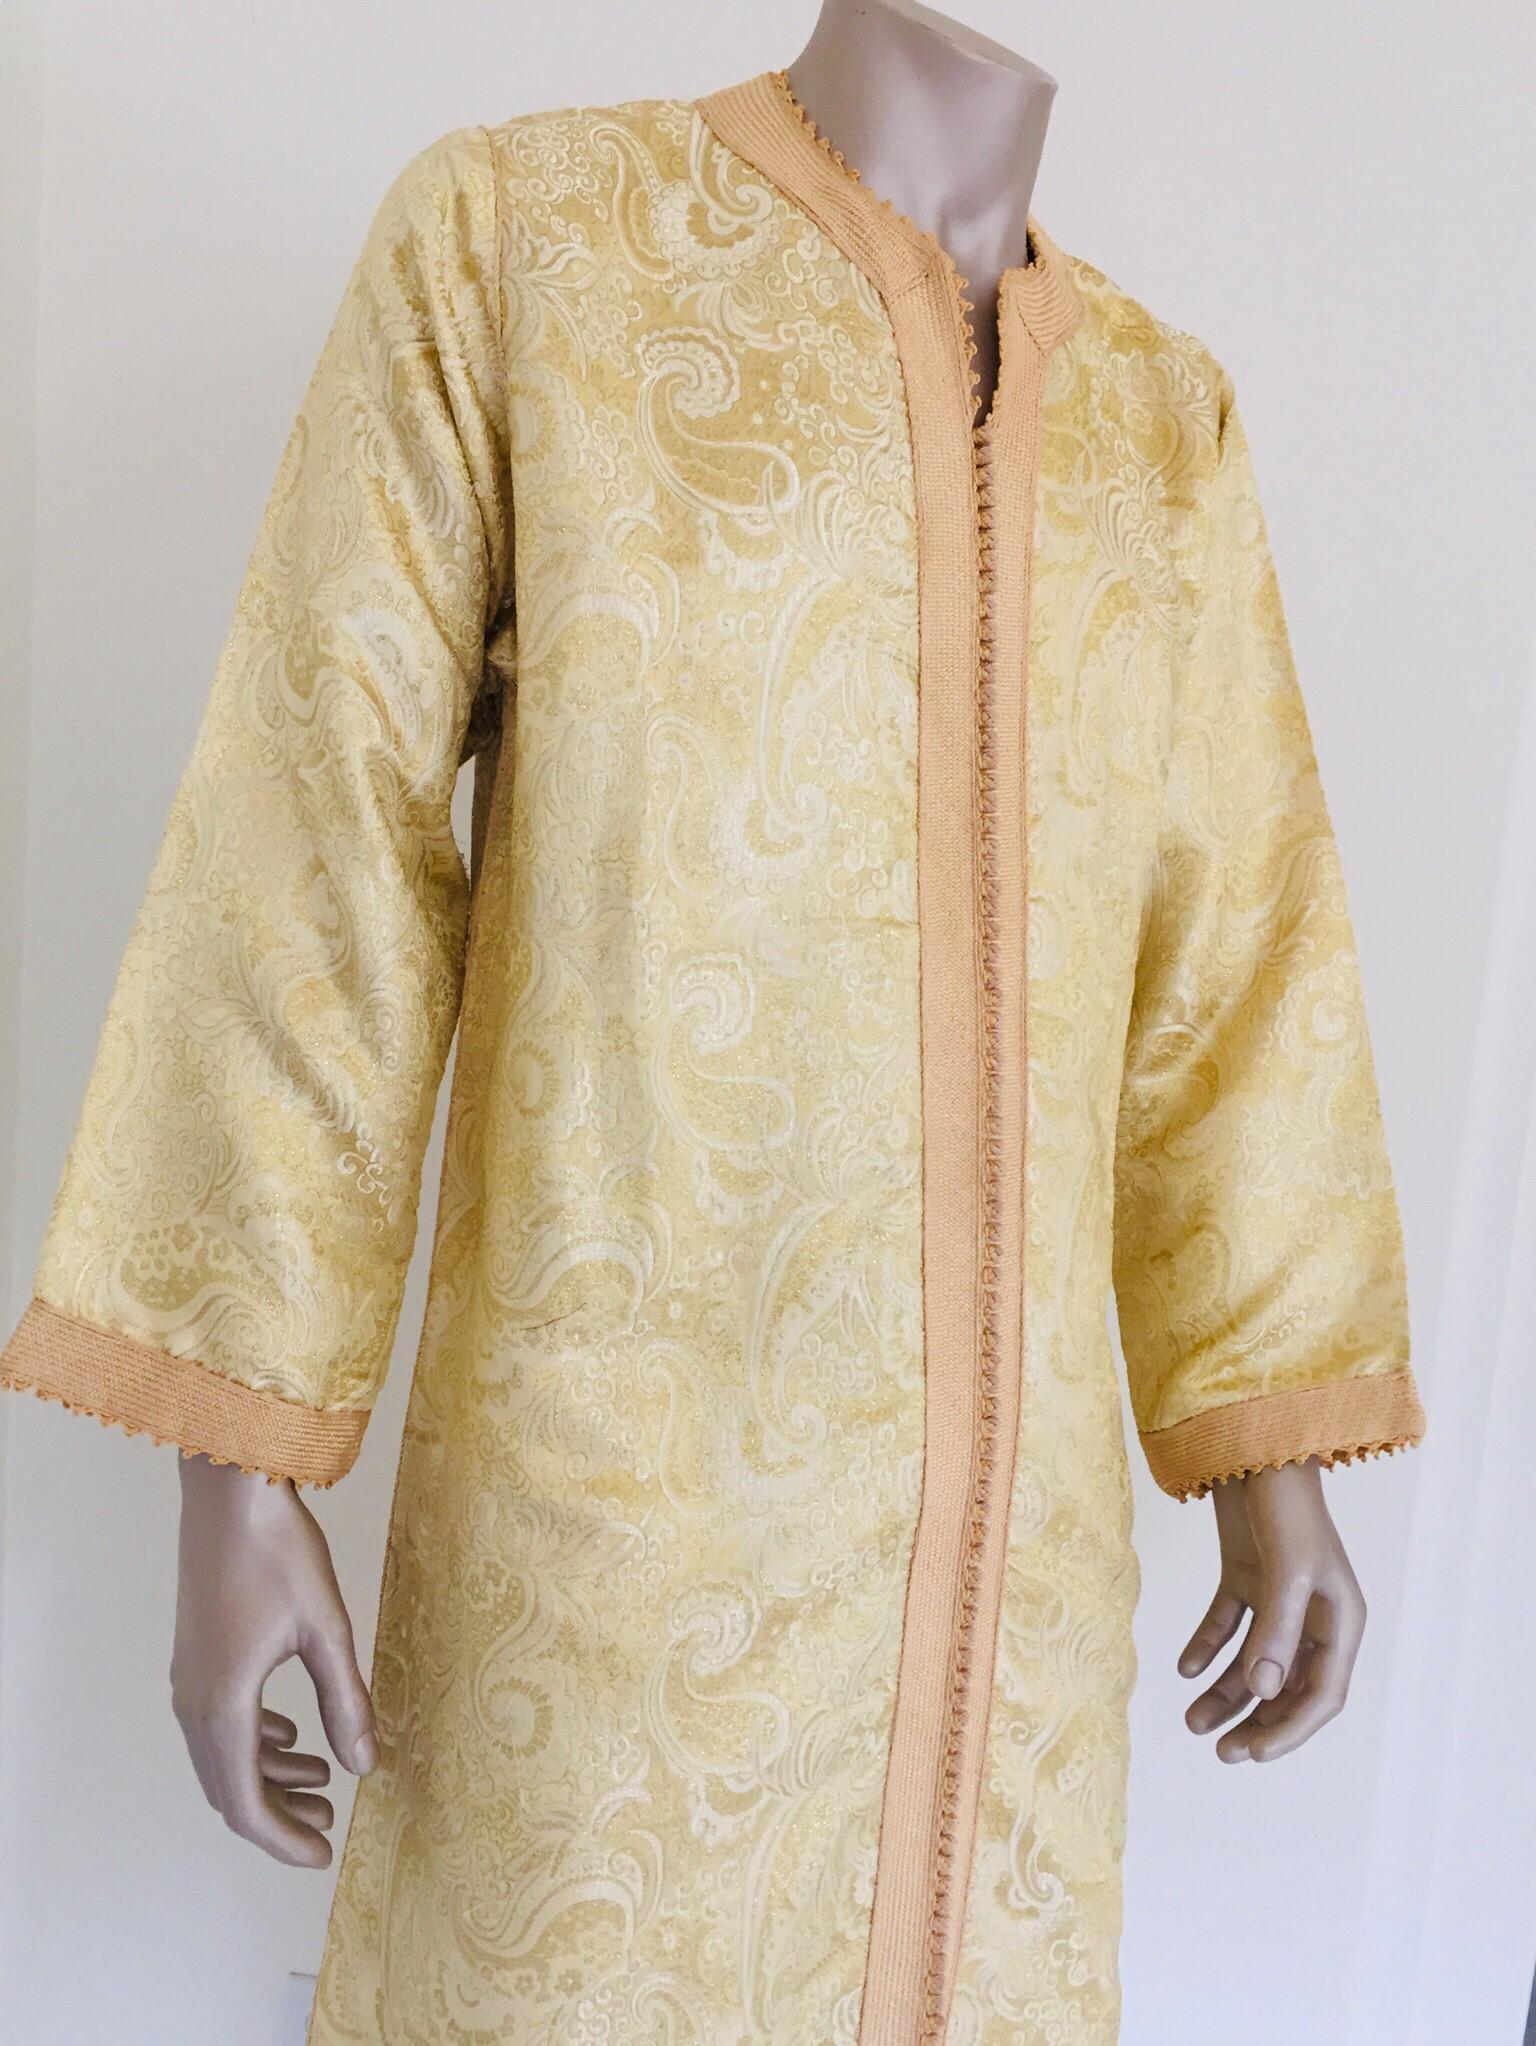 Moroccan Kaftan Gold and Silver Brocade 1970s Maxi Dress Caftan In Good Condition For Sale In North Hollywood, CA